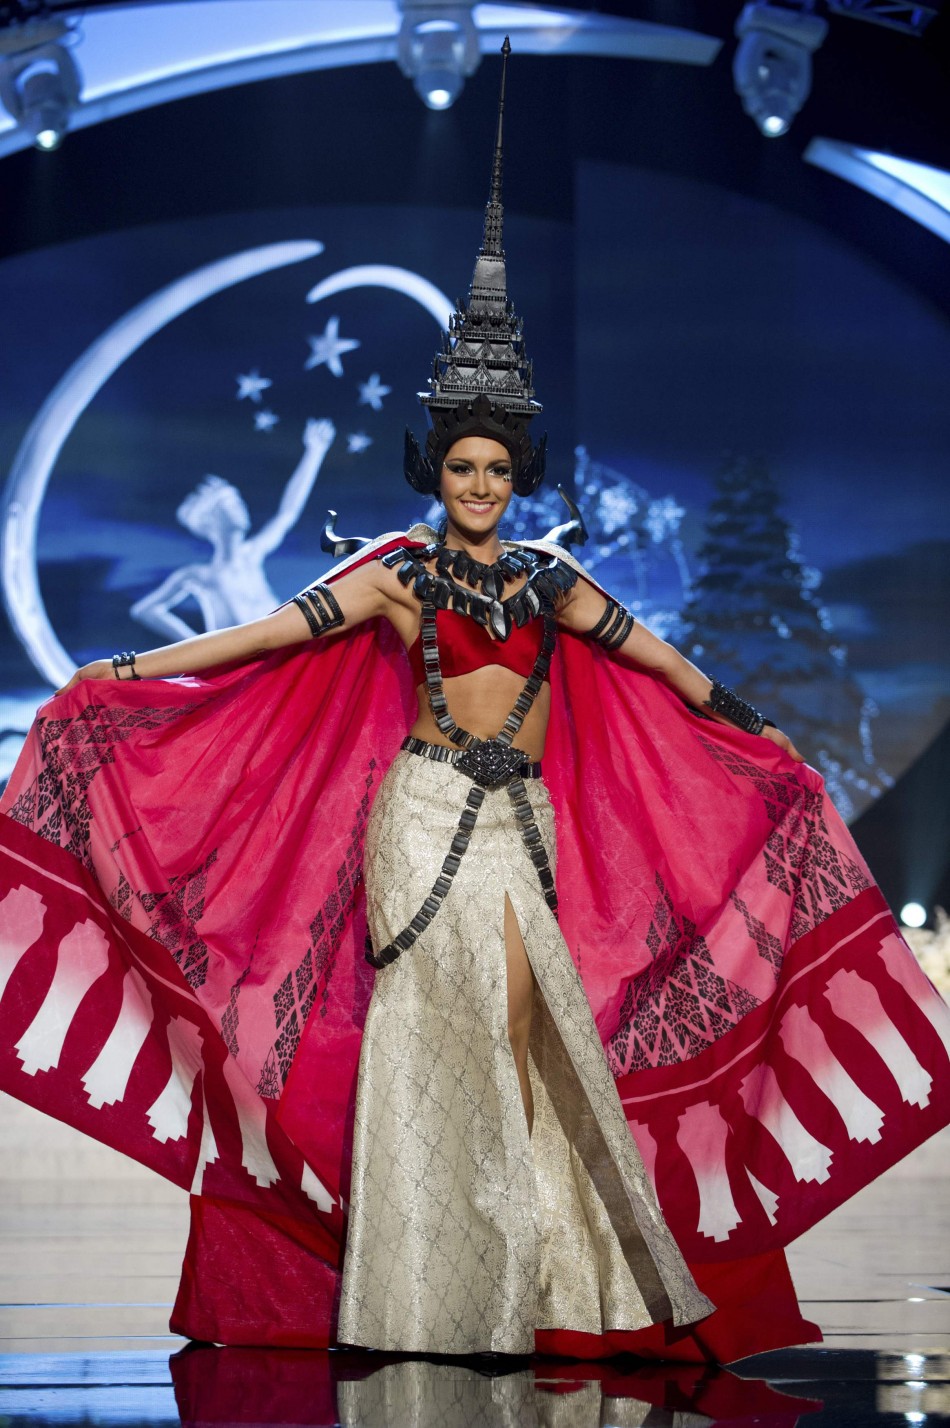 Miss Thailand Farida Waller on stage at the 2012 Miss Universe National Costume Show at PH Live in Las Vegas